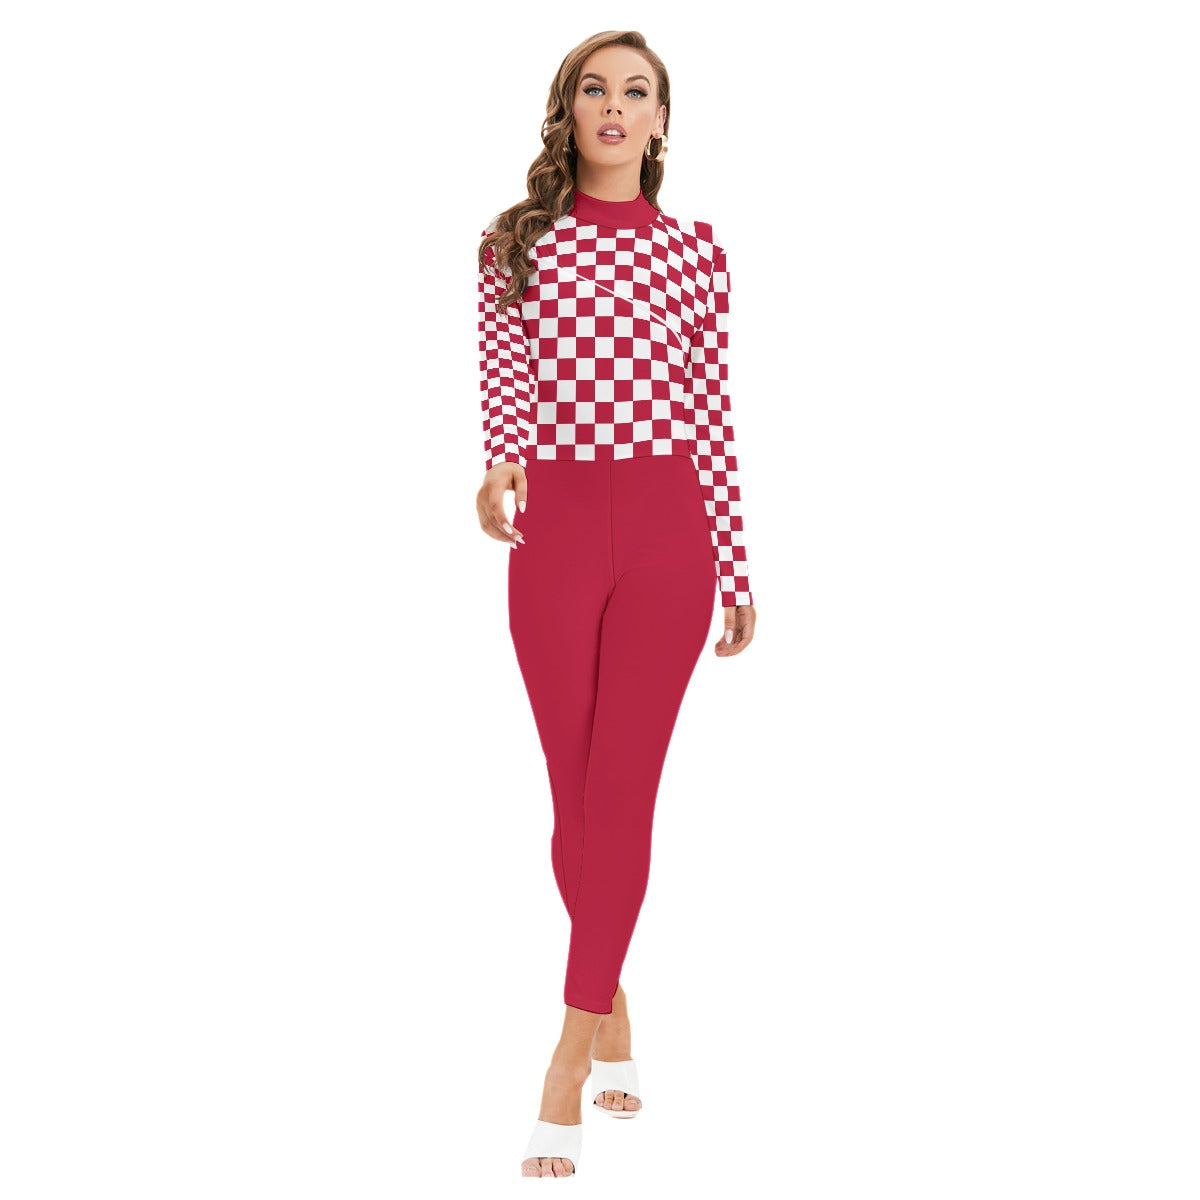 Checkerboard Women's Long-sleeved High-neck Jumpsuit With Zipper